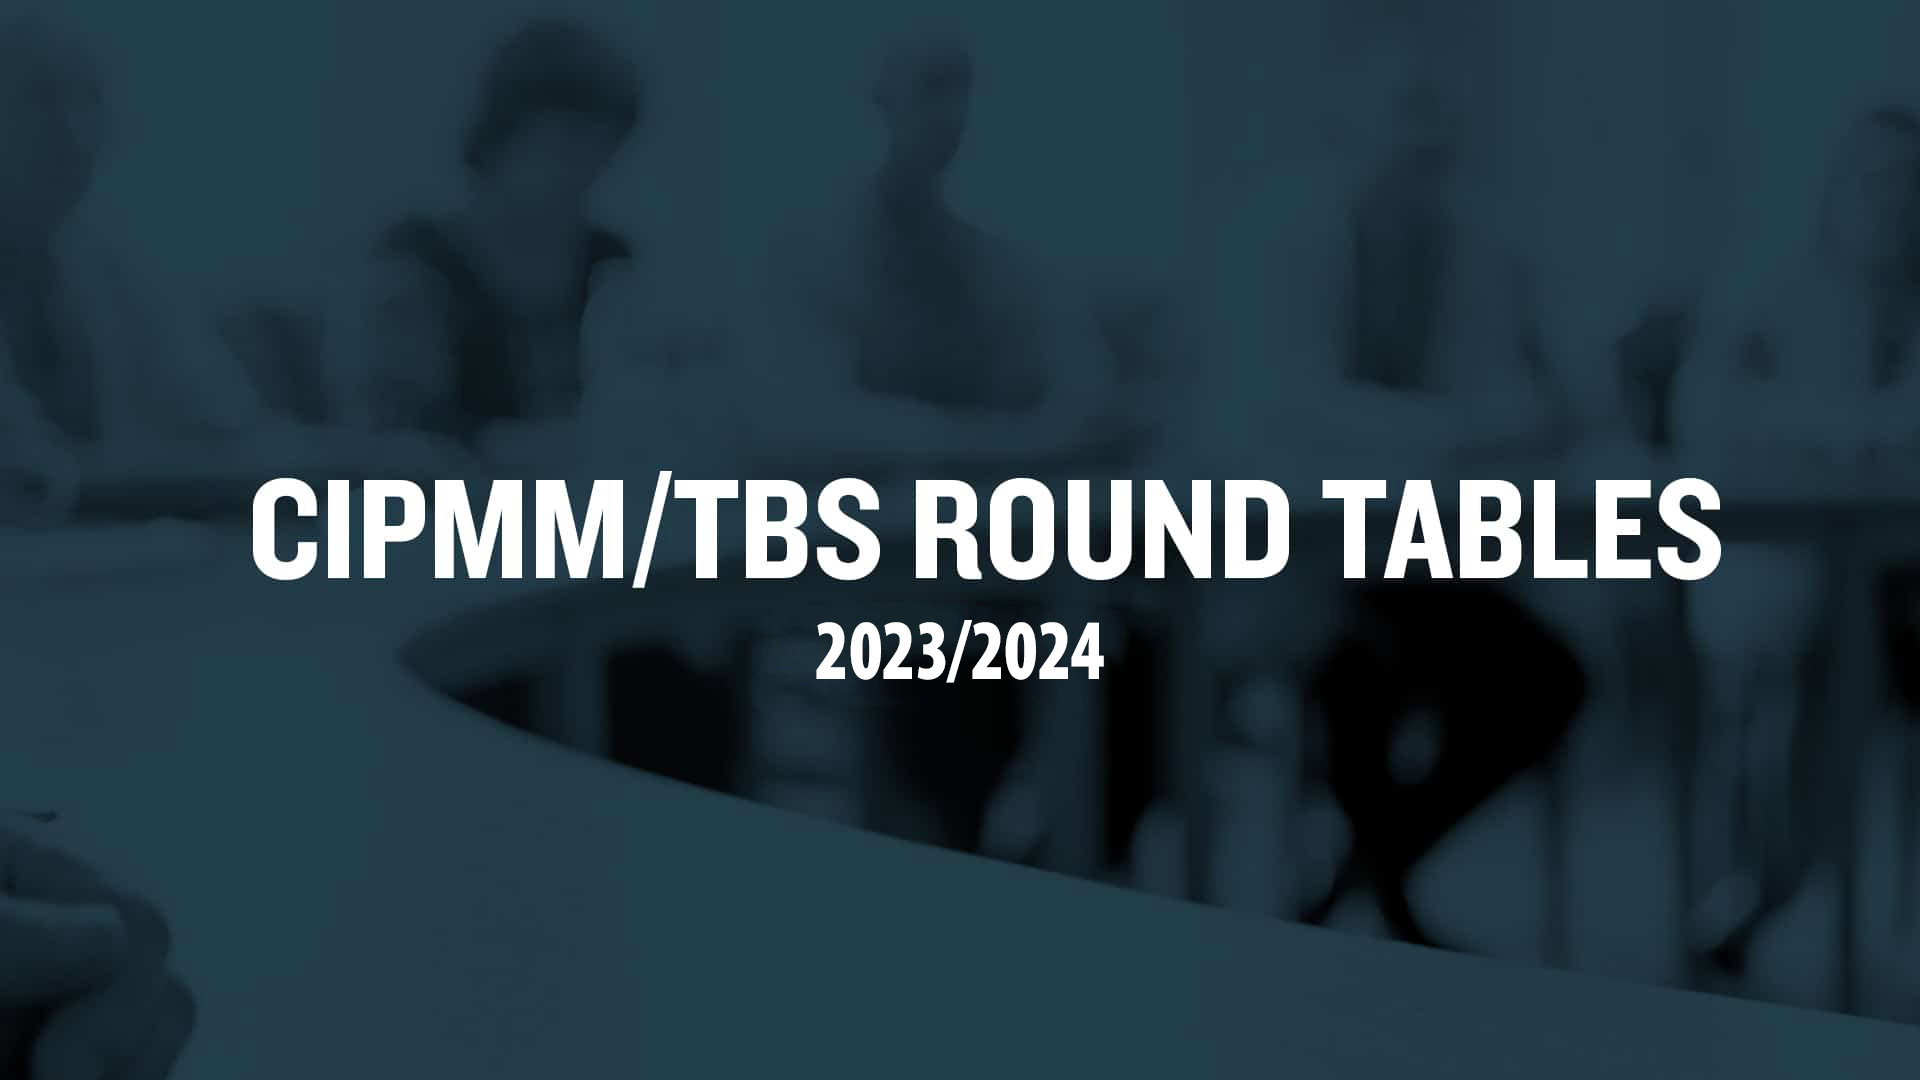 CIPMM/TBS Round Tables 2023-2024